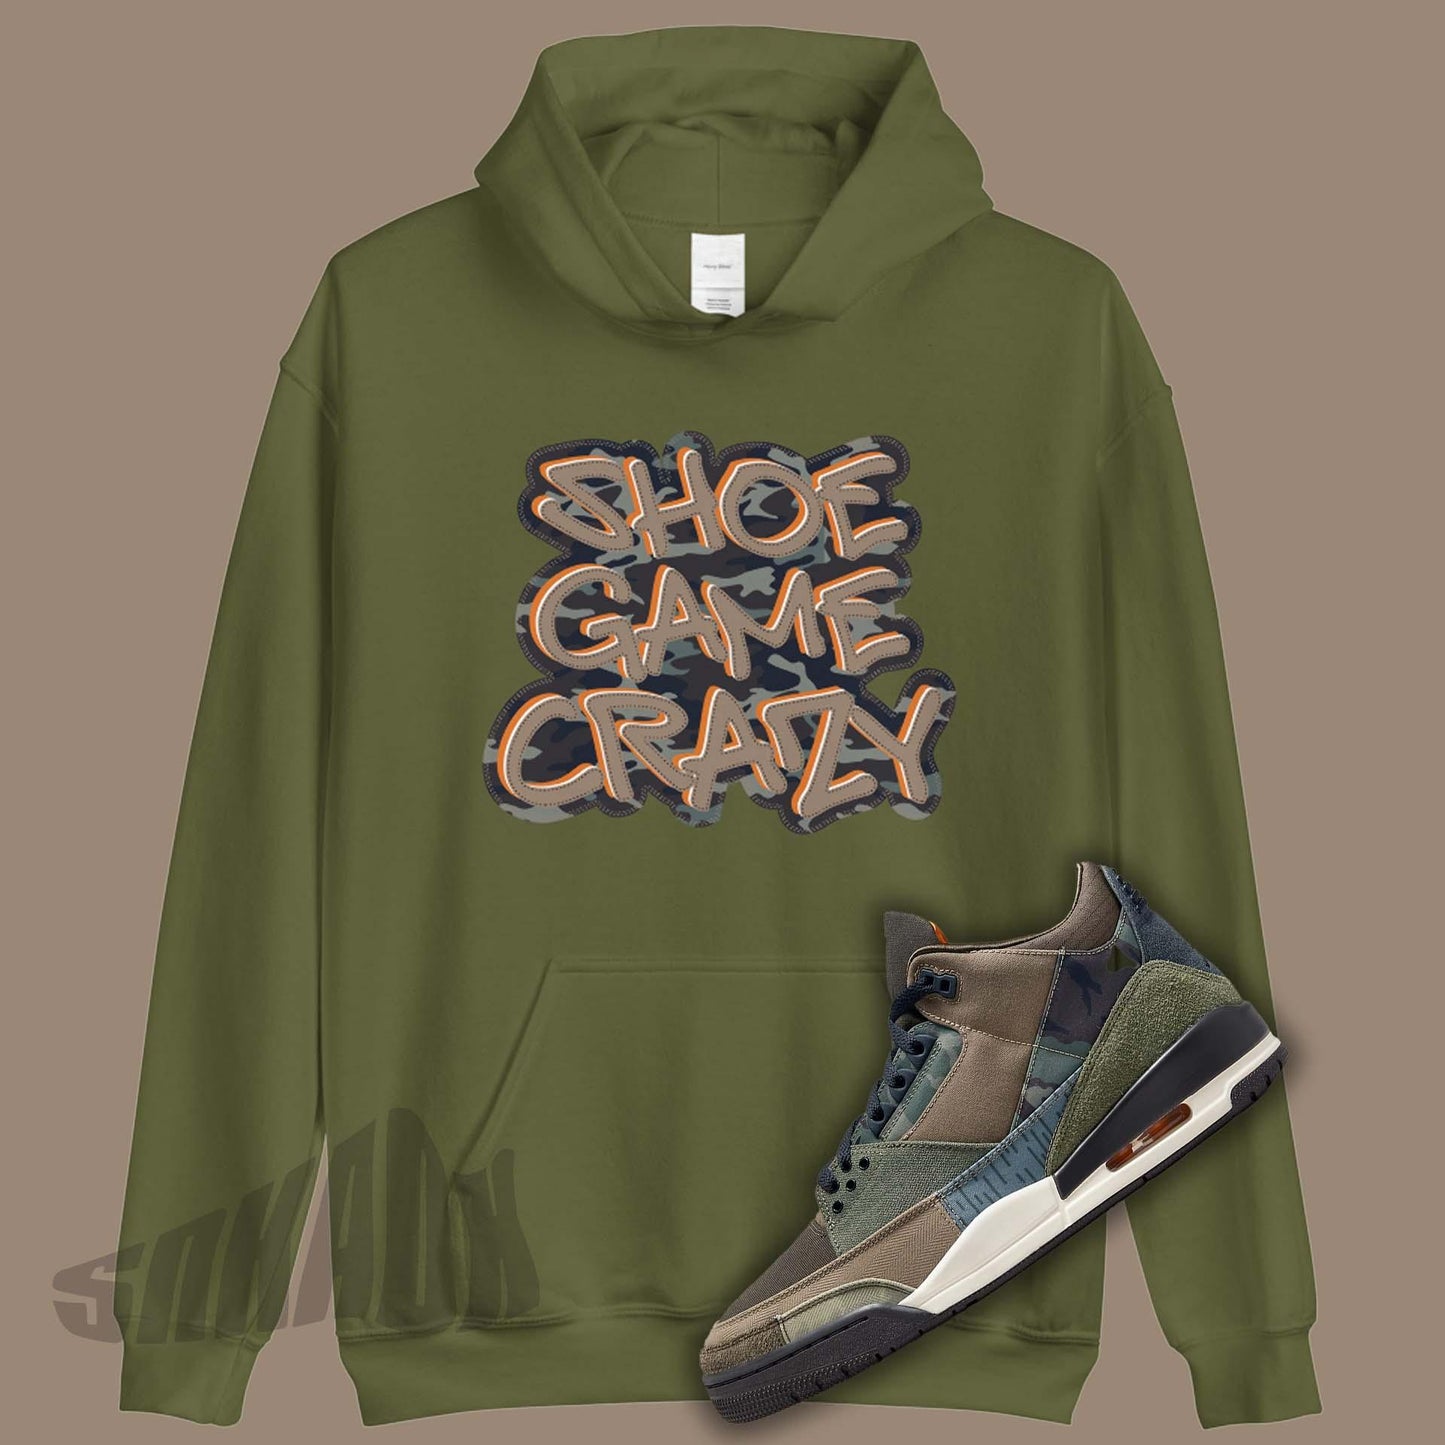 Shoe Game Crazy Army Green with Camouflage Print